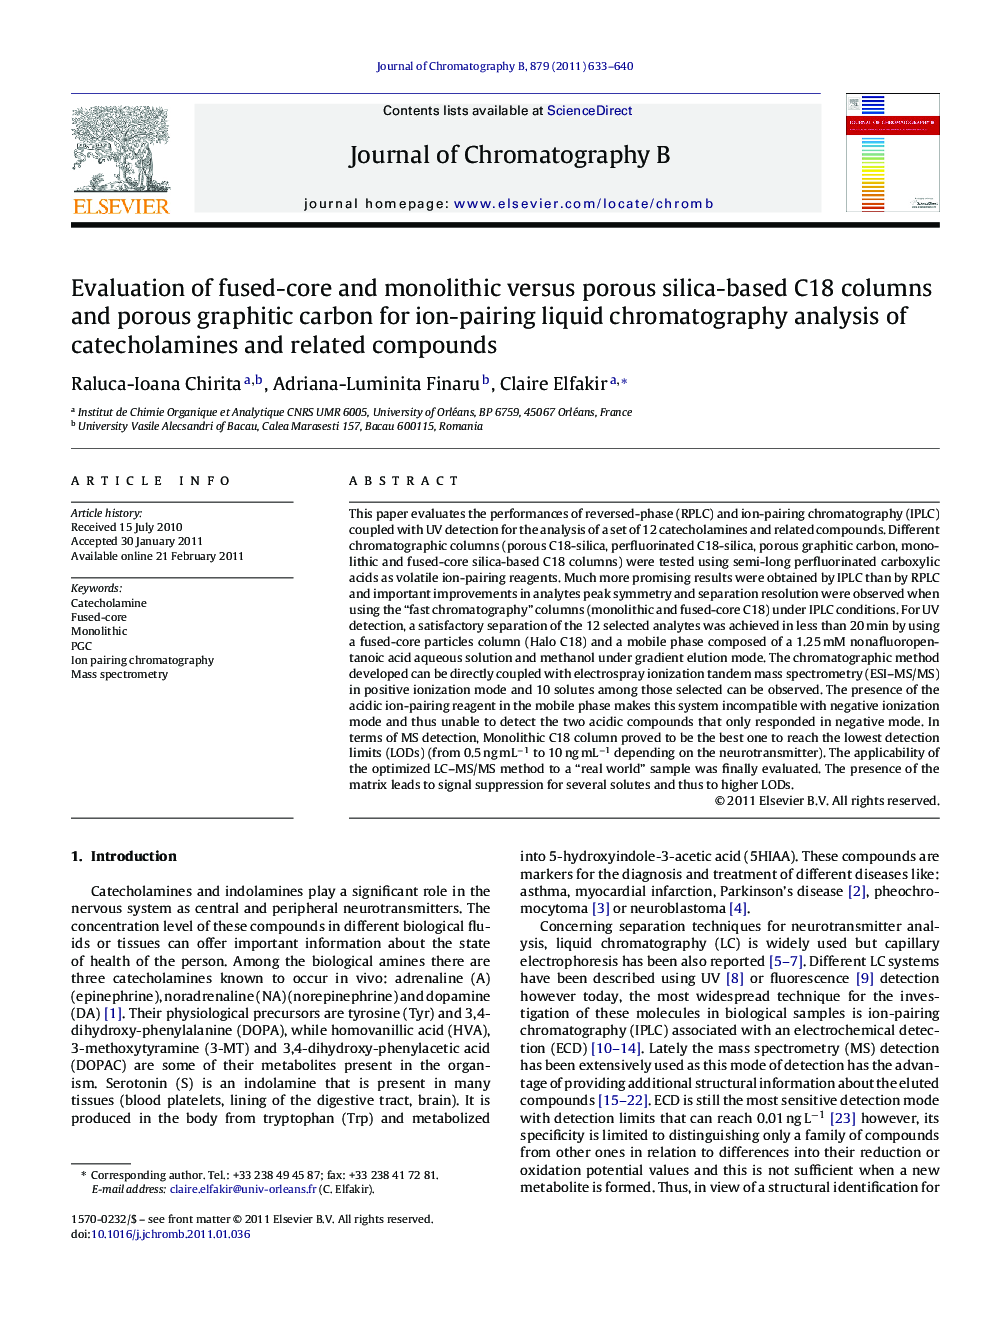 Evaluation of fused-core and monolithic versus porous silica-based C18 columns and porous graphitic carbon for ion-pairing liquid chromatography analysis of catecholamines and related compounds